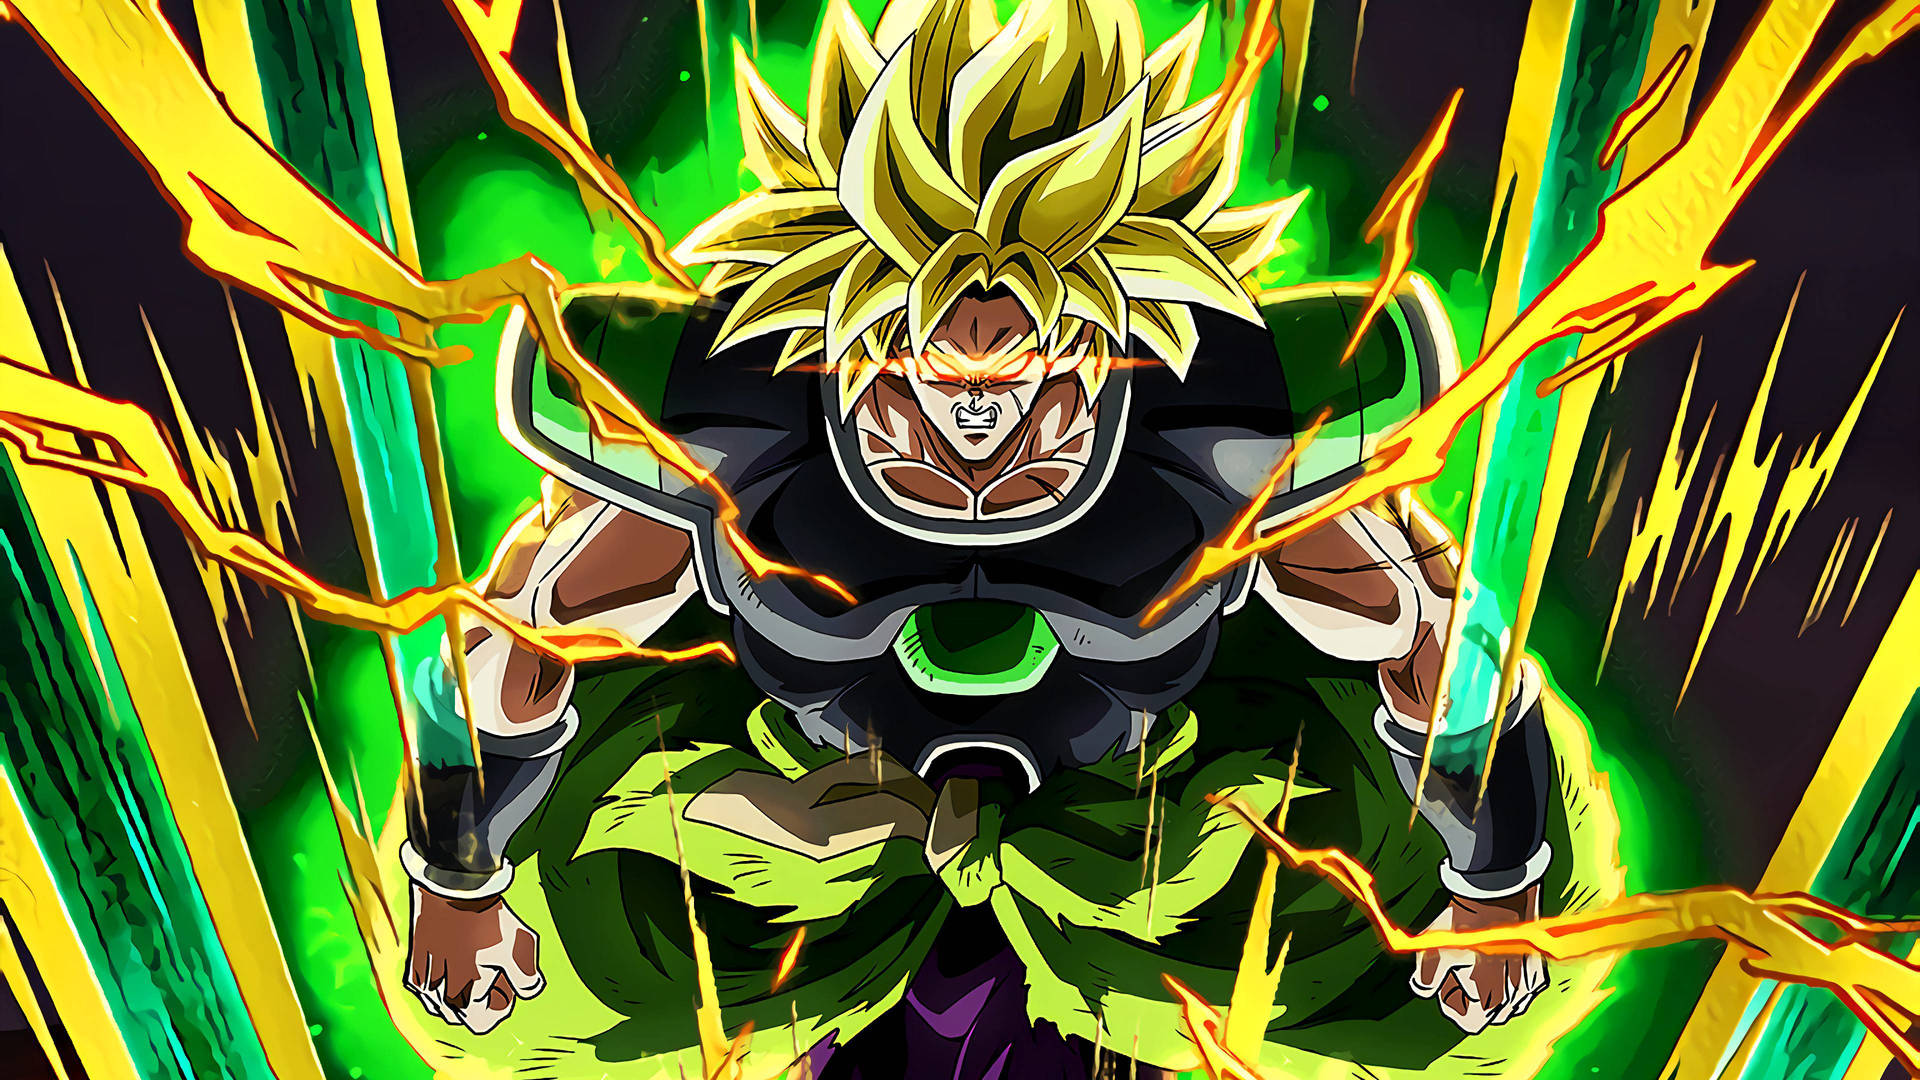 Broly Wall Posters | Dragon Ball Broly Poster | Anime Posters